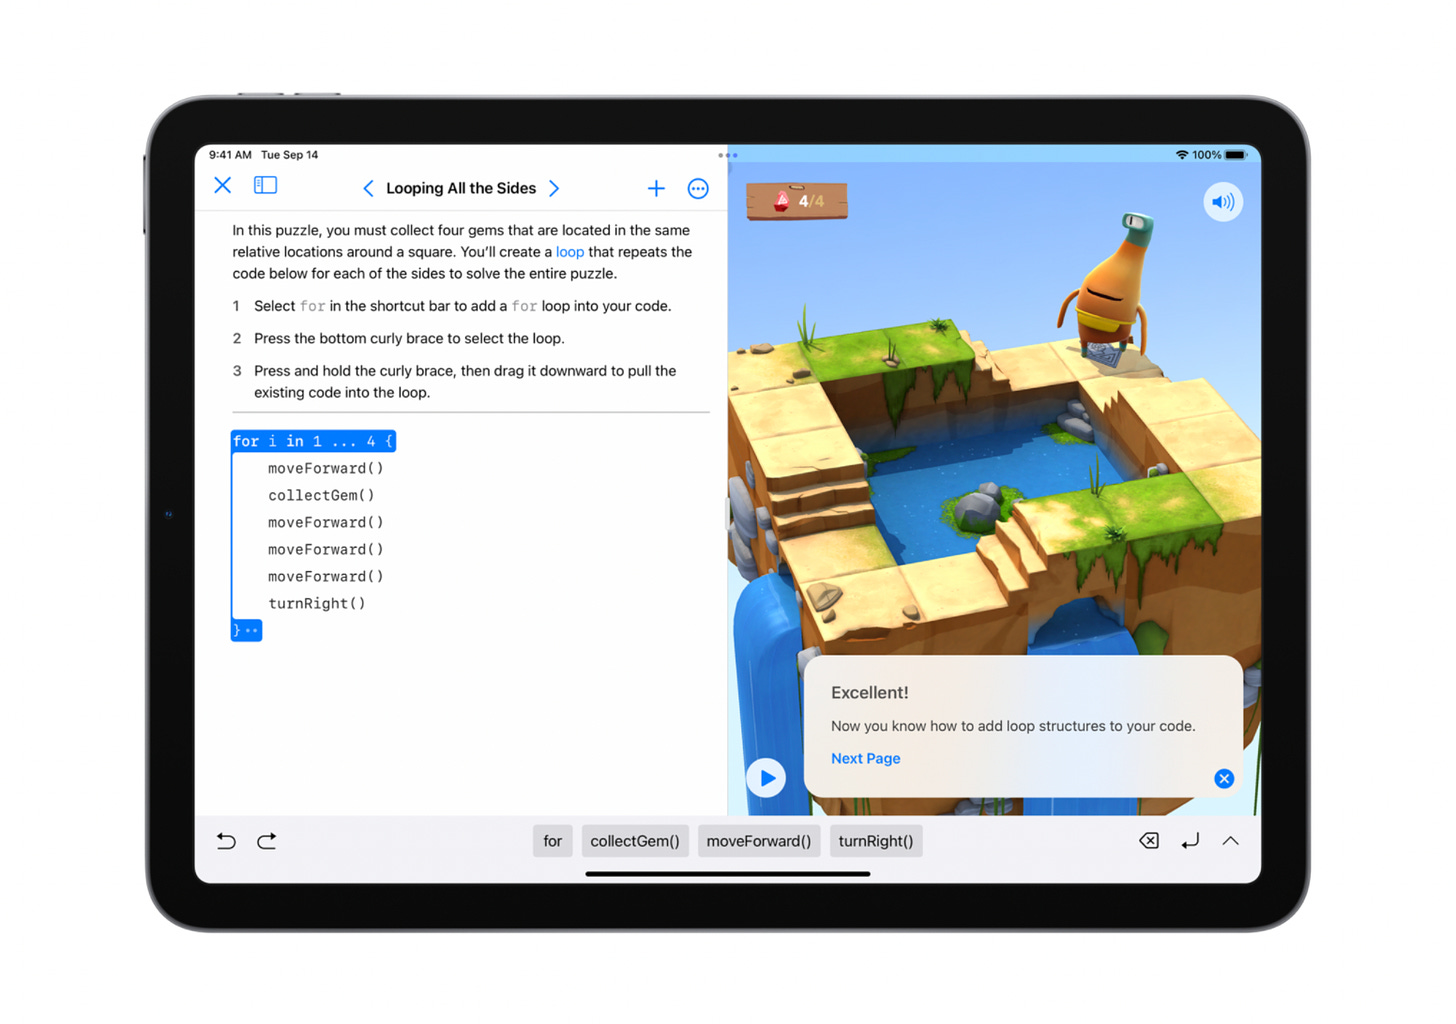 Apple releases Swift Playgrounds 4 with support for app development on iPad  | TechCrunch